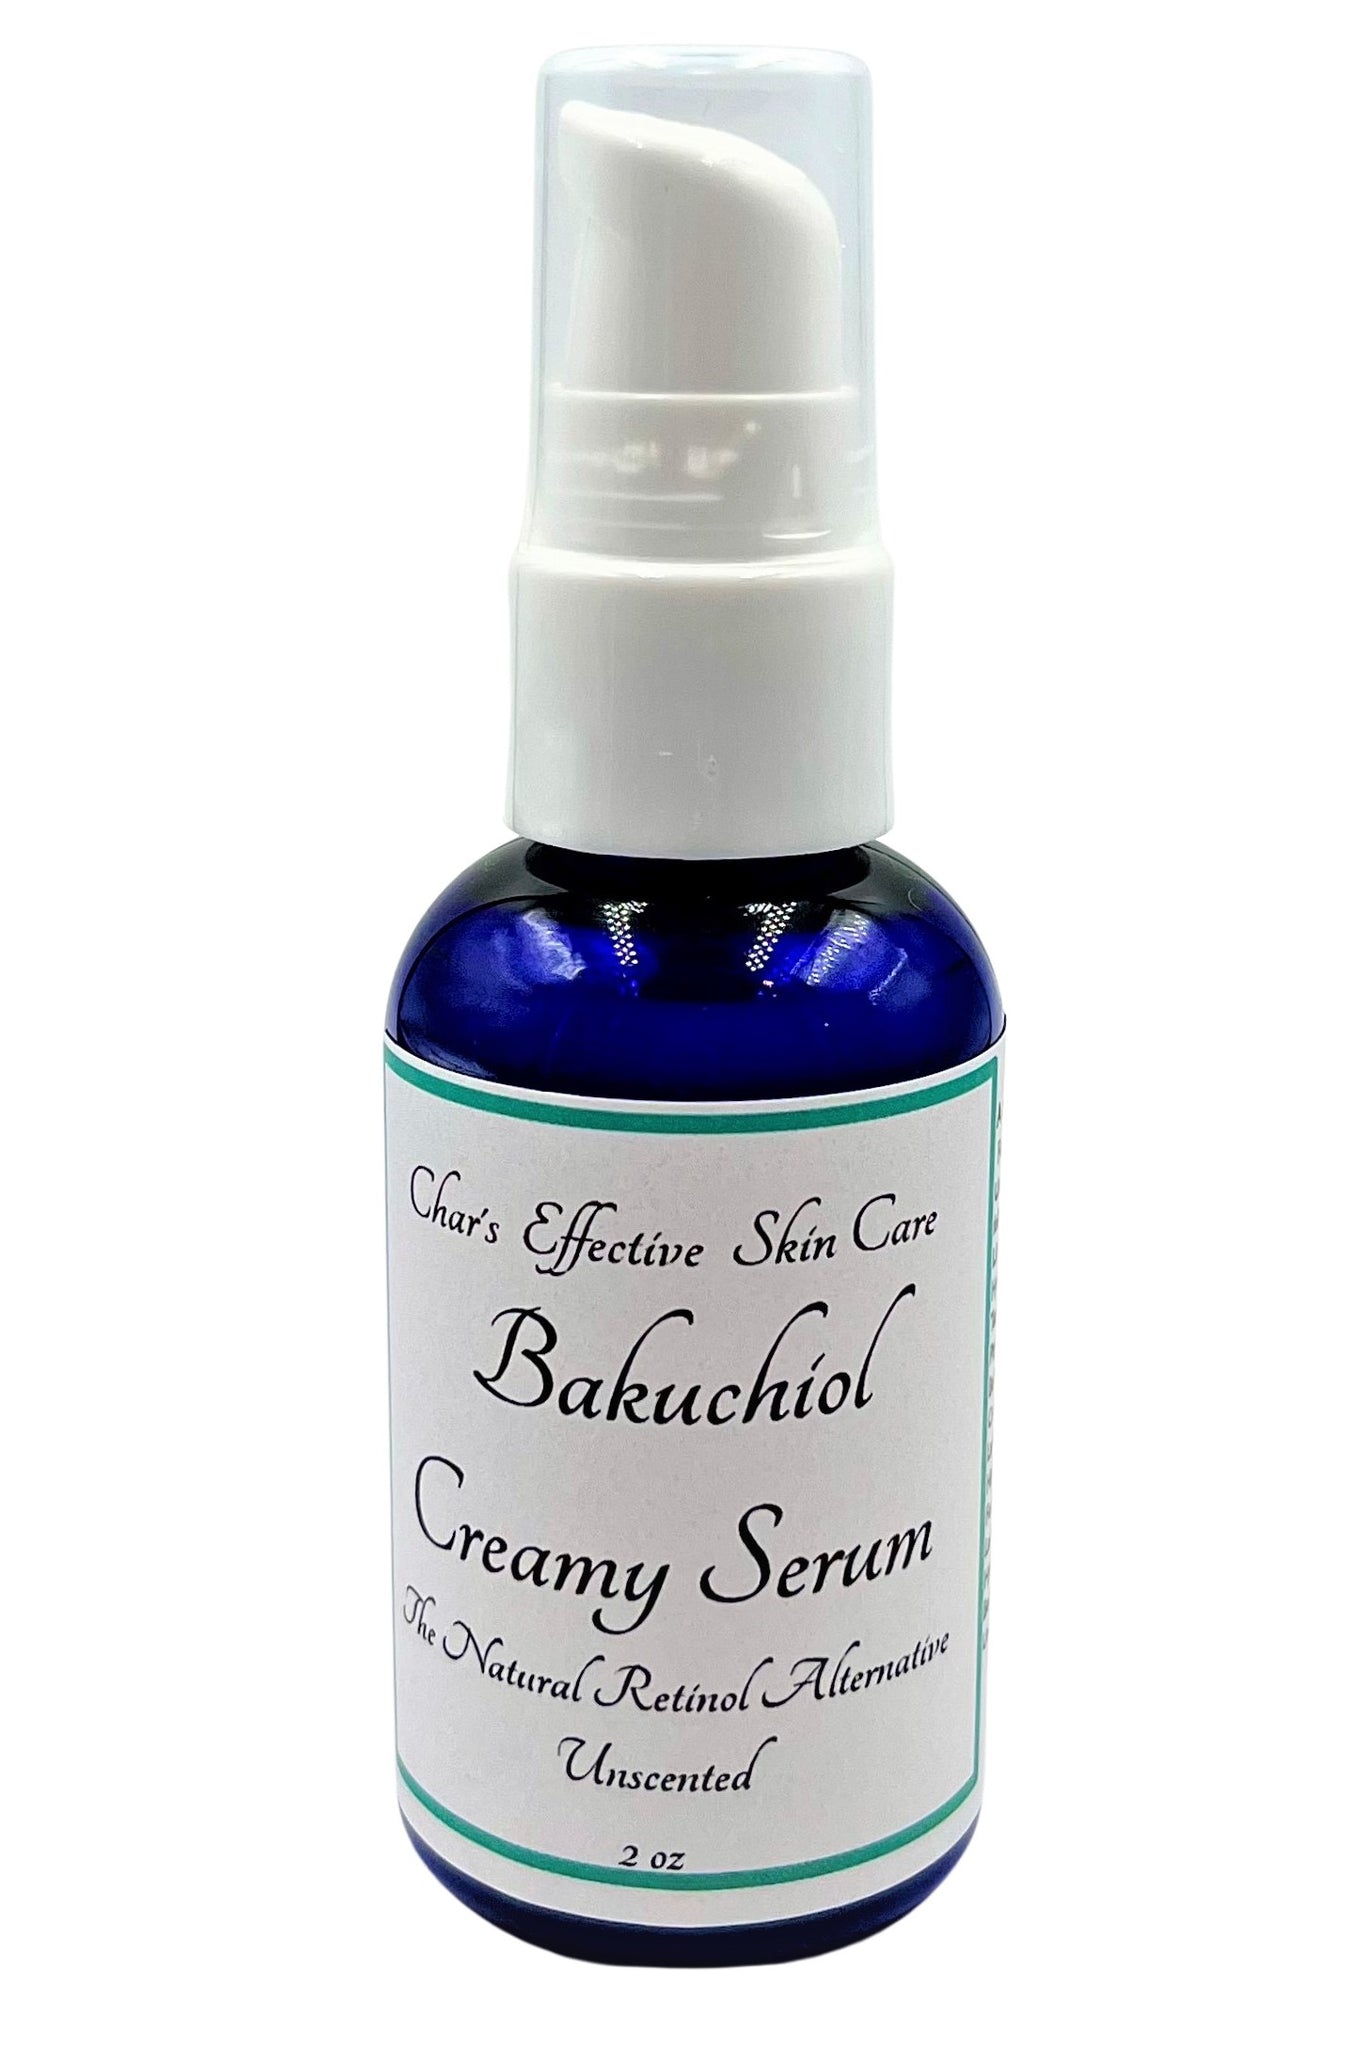 Creamy Bakuchiol Serum the Natural Retinol Alternative(3%)/UNSCENTED option/with Niacinamide,Centella Asiatica and White Tea Extracts/All Skin Types/ Blue 2 ounce bottle with treatment pump/Char's Effective Skin Care